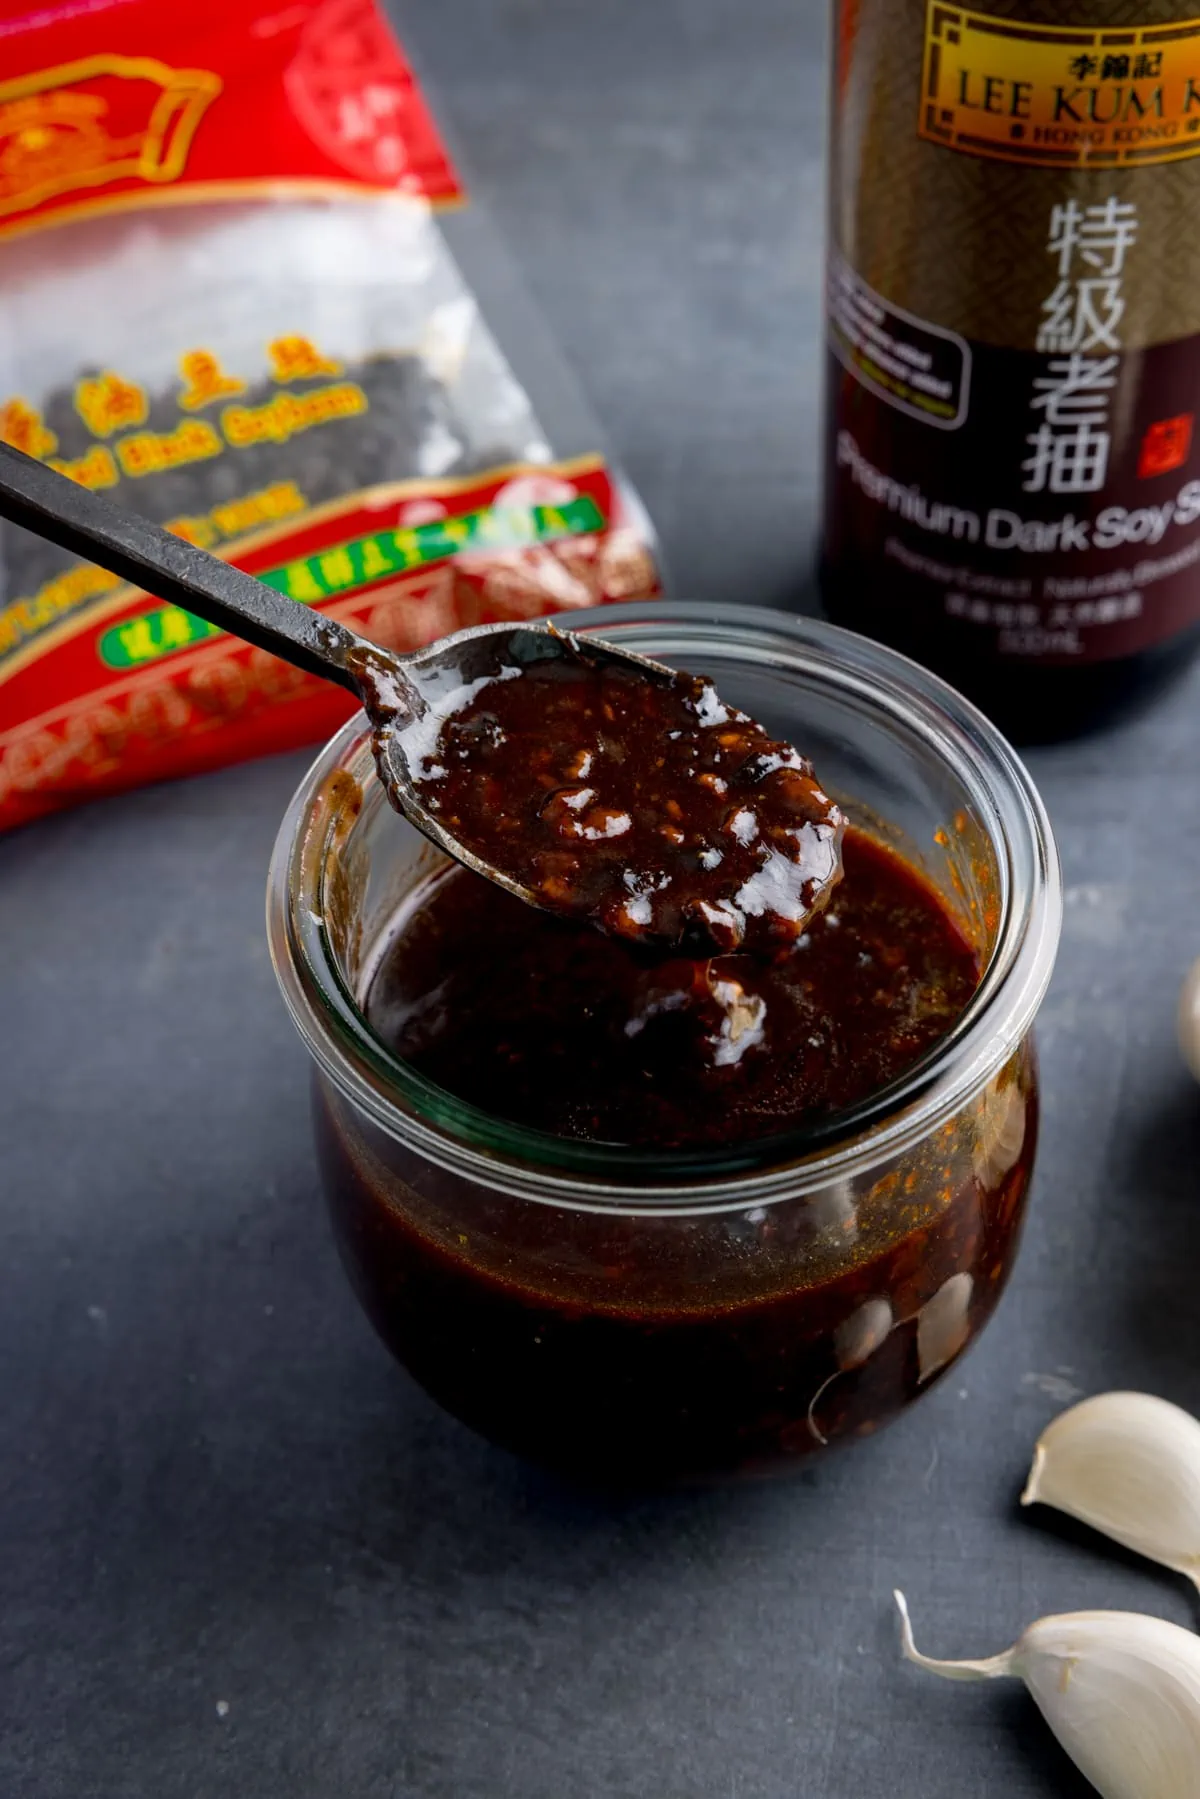 A glass jar filled with homemade black bean sauce. There is a black spoon, taking a spoonful from the jar. The jar is on a dark surface and there are scattered ingredients.